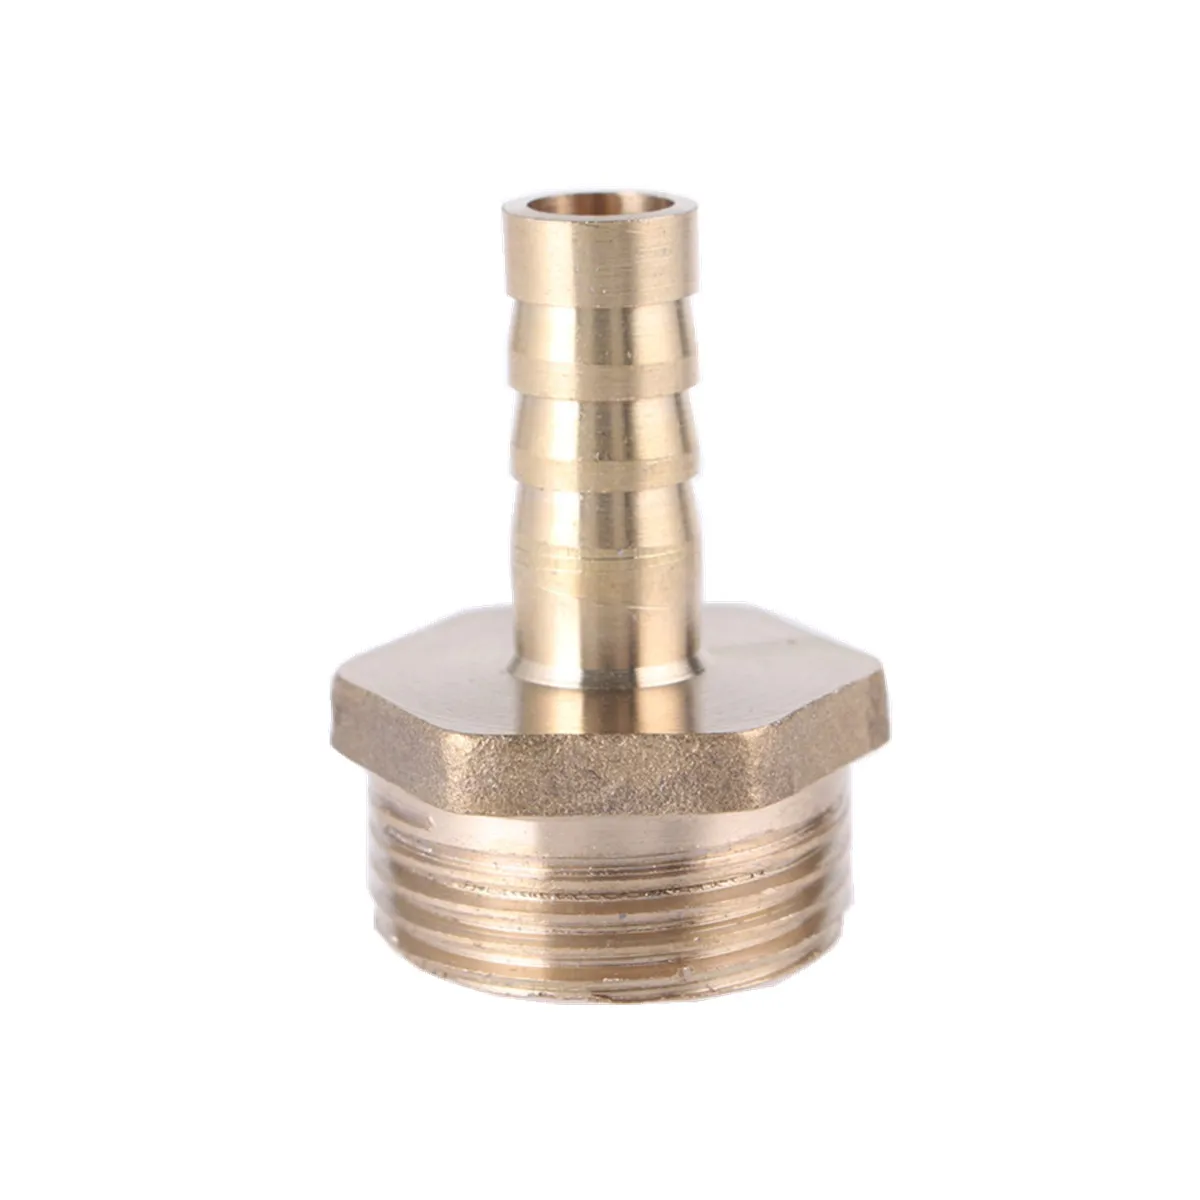 Brass Pipe Fitting 6mm - 25mm 8 10mm Hose Barb Tail 1/8